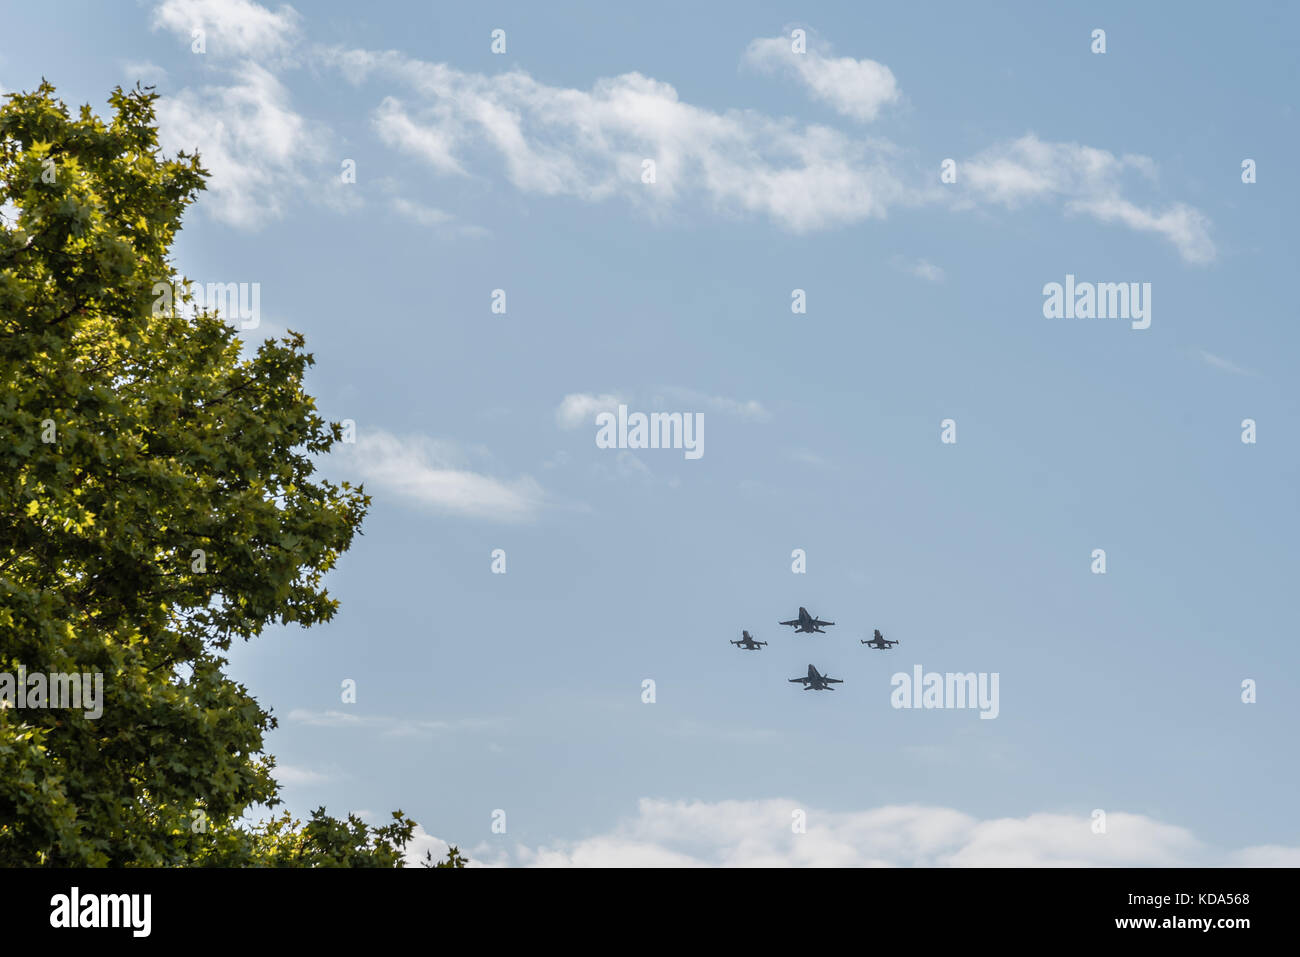 Madrid, Spain - October 12, 2017: Two F18 Hornet and two F5 jet fighters flying in Spanish National Day Parade. Several troops take part in the army parade for Spain's National Day. King Felipe VI, Queen Letizia and Spanish Prime Minister Mariano Rajoy presided over the parade. Juan Jimenez/Alamy Live News Stock Photo